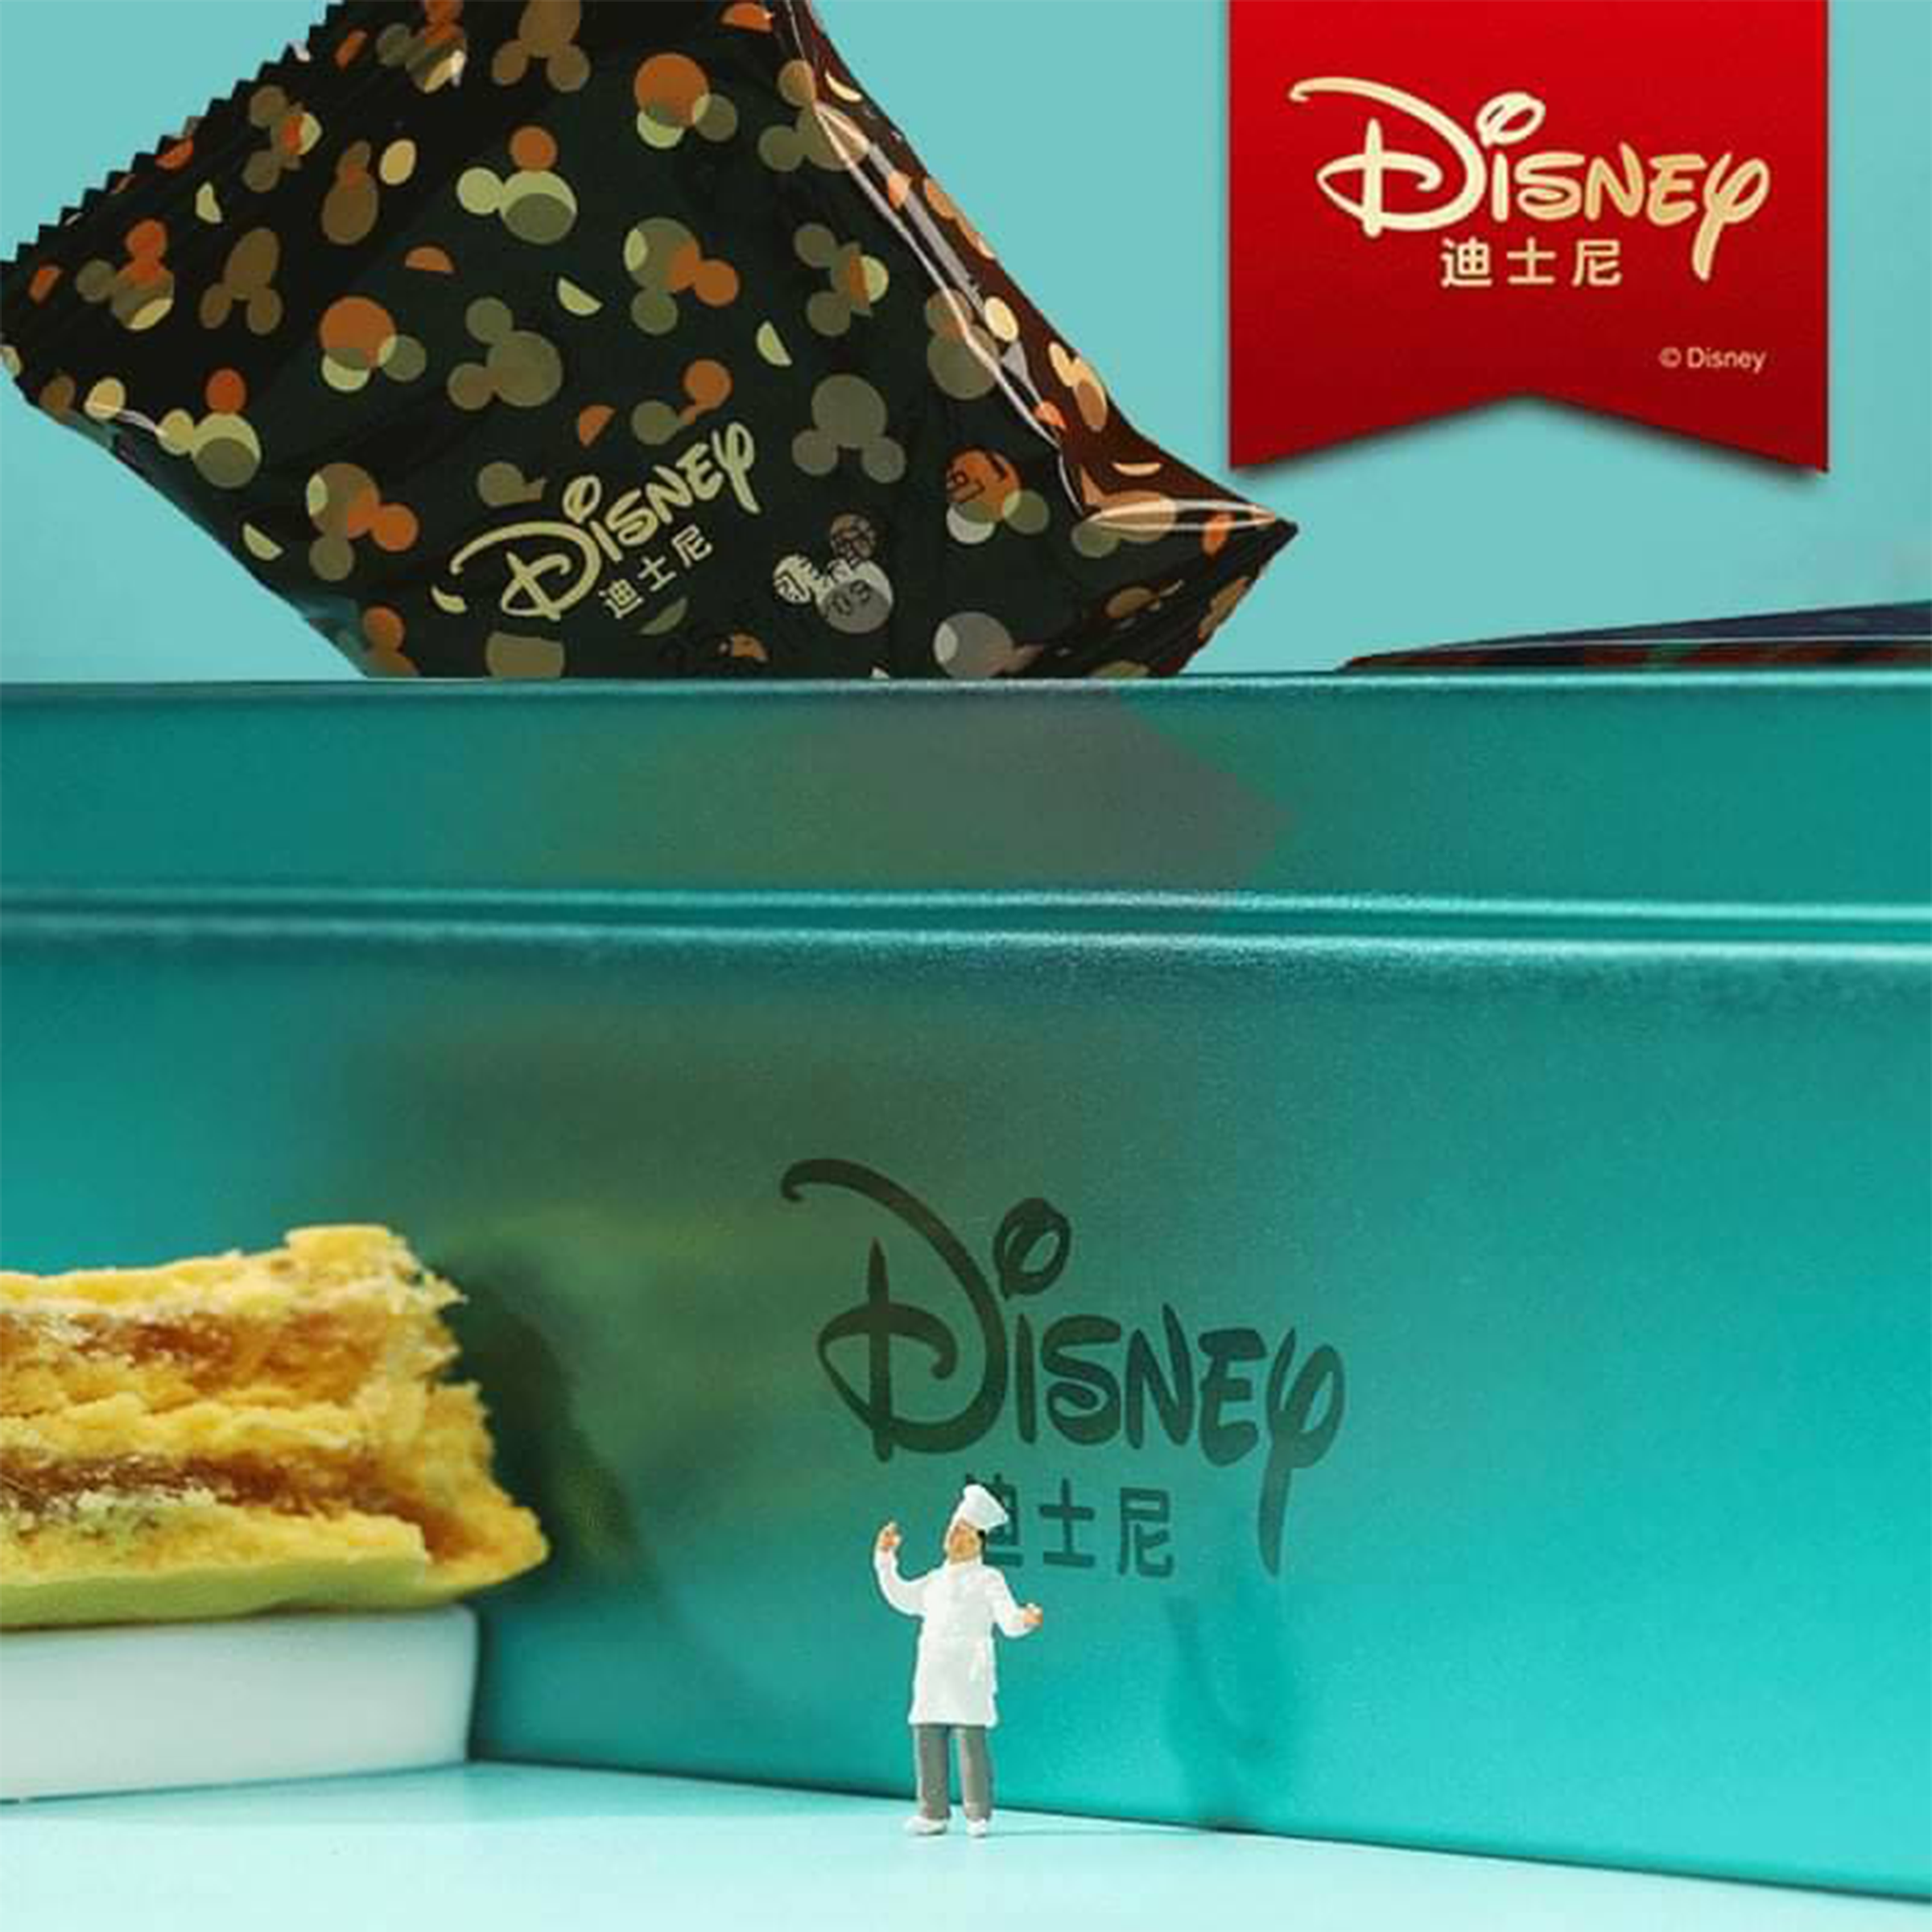 Disney Chinese New Year Biscuits "Gift Box" (Asia)